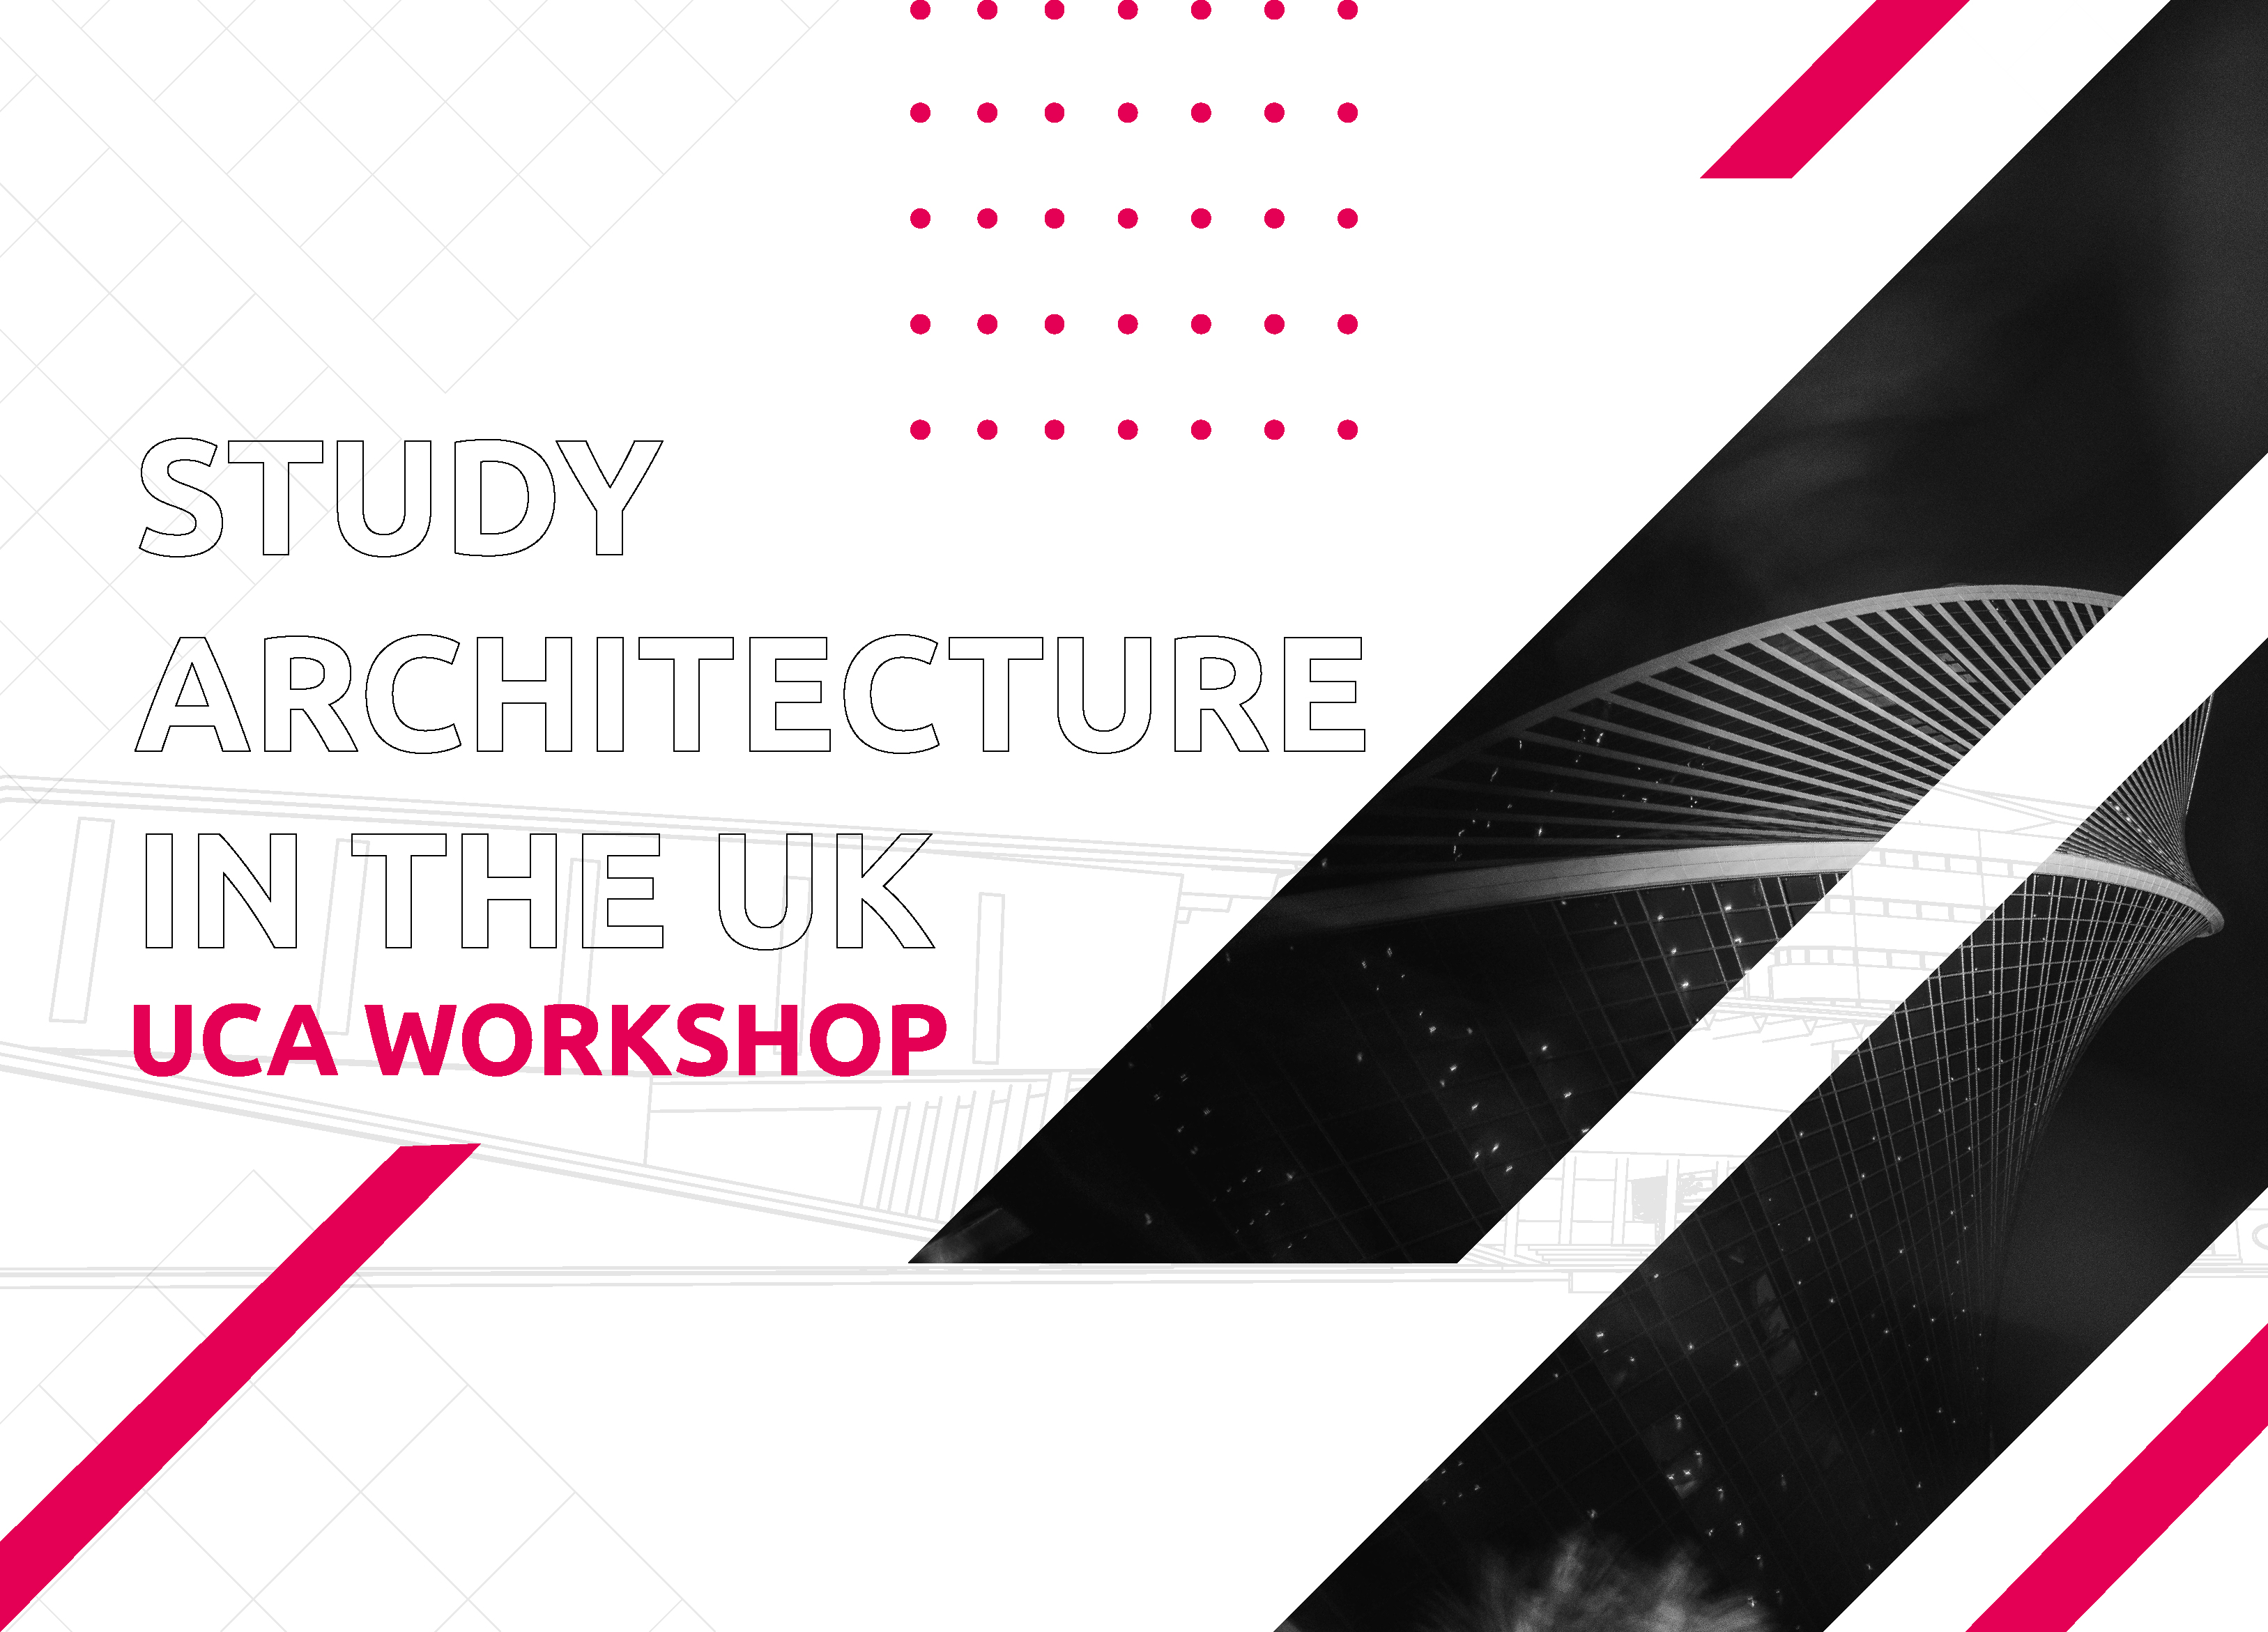 UCA Workshop - Study Architecture in the UK 